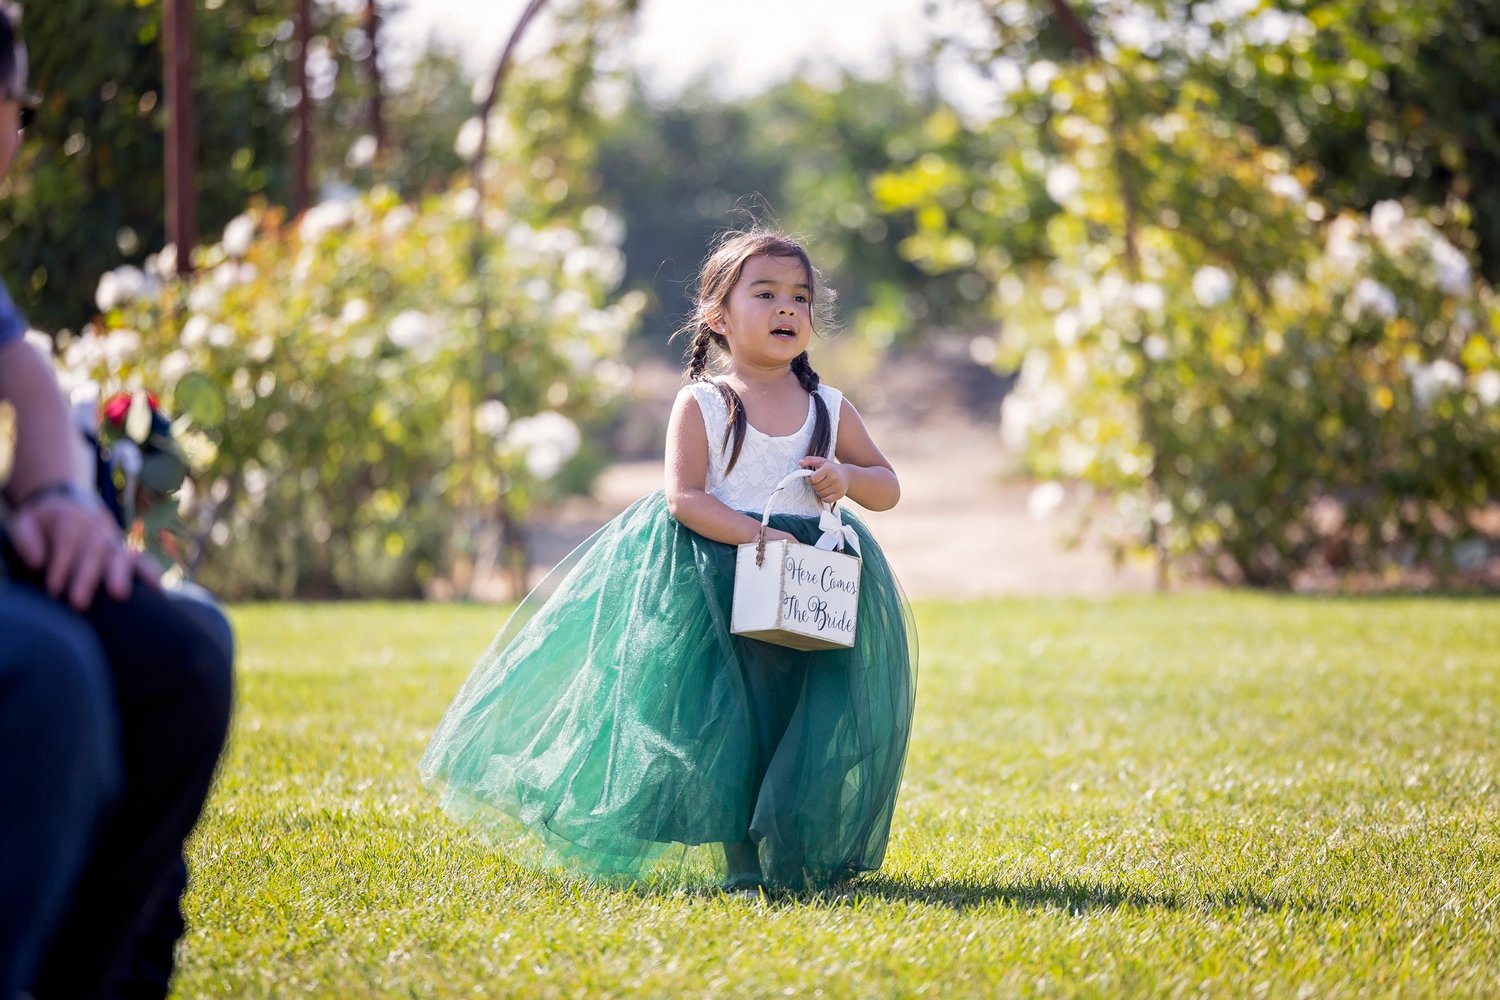 flower girl on the grass at a wedding